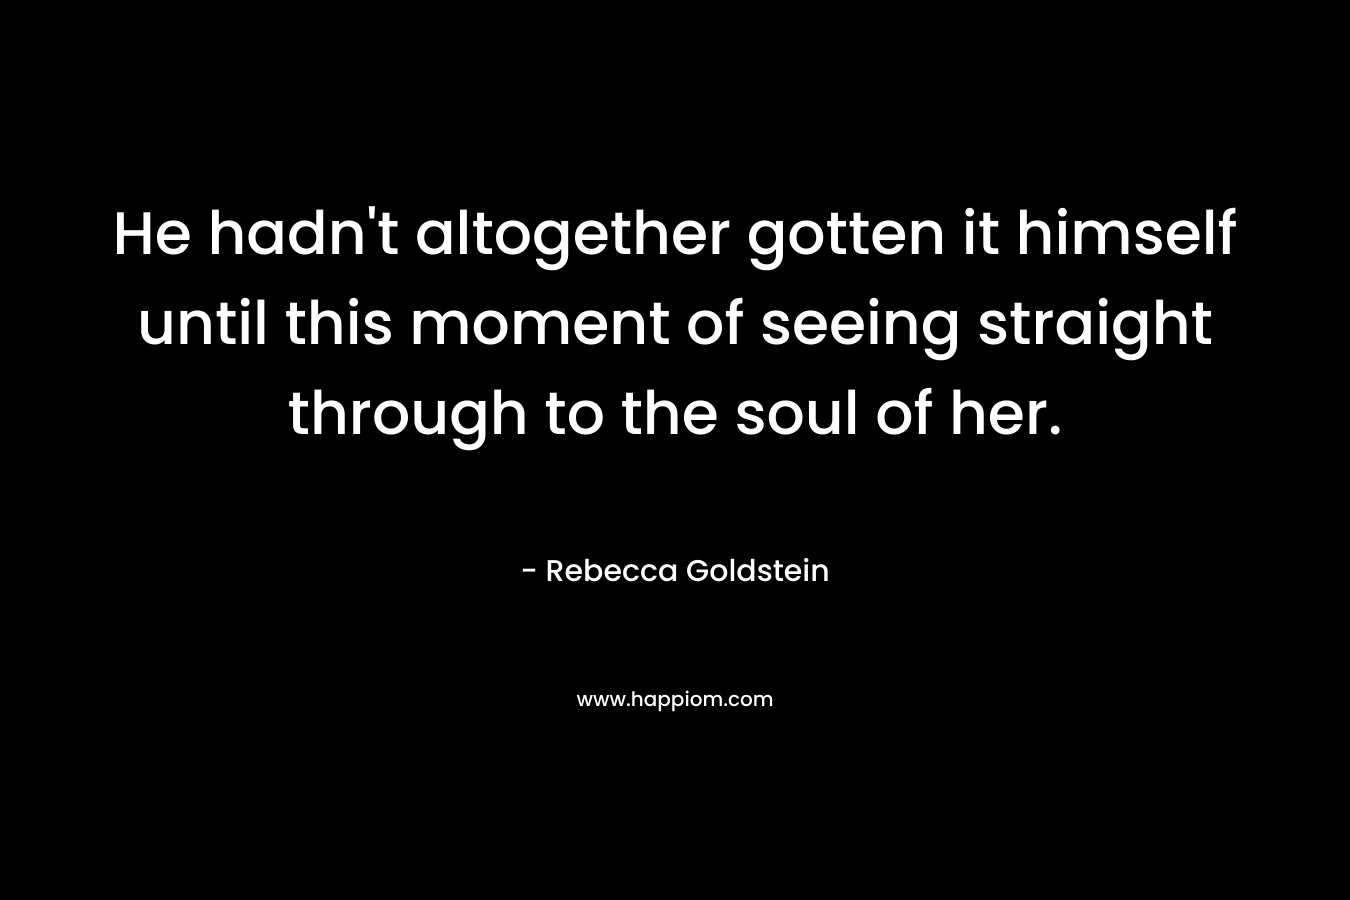 He hadn’t altogether gotten it himself until this moment of seeing straight through to the soul of her. – Rebecca Goldstein